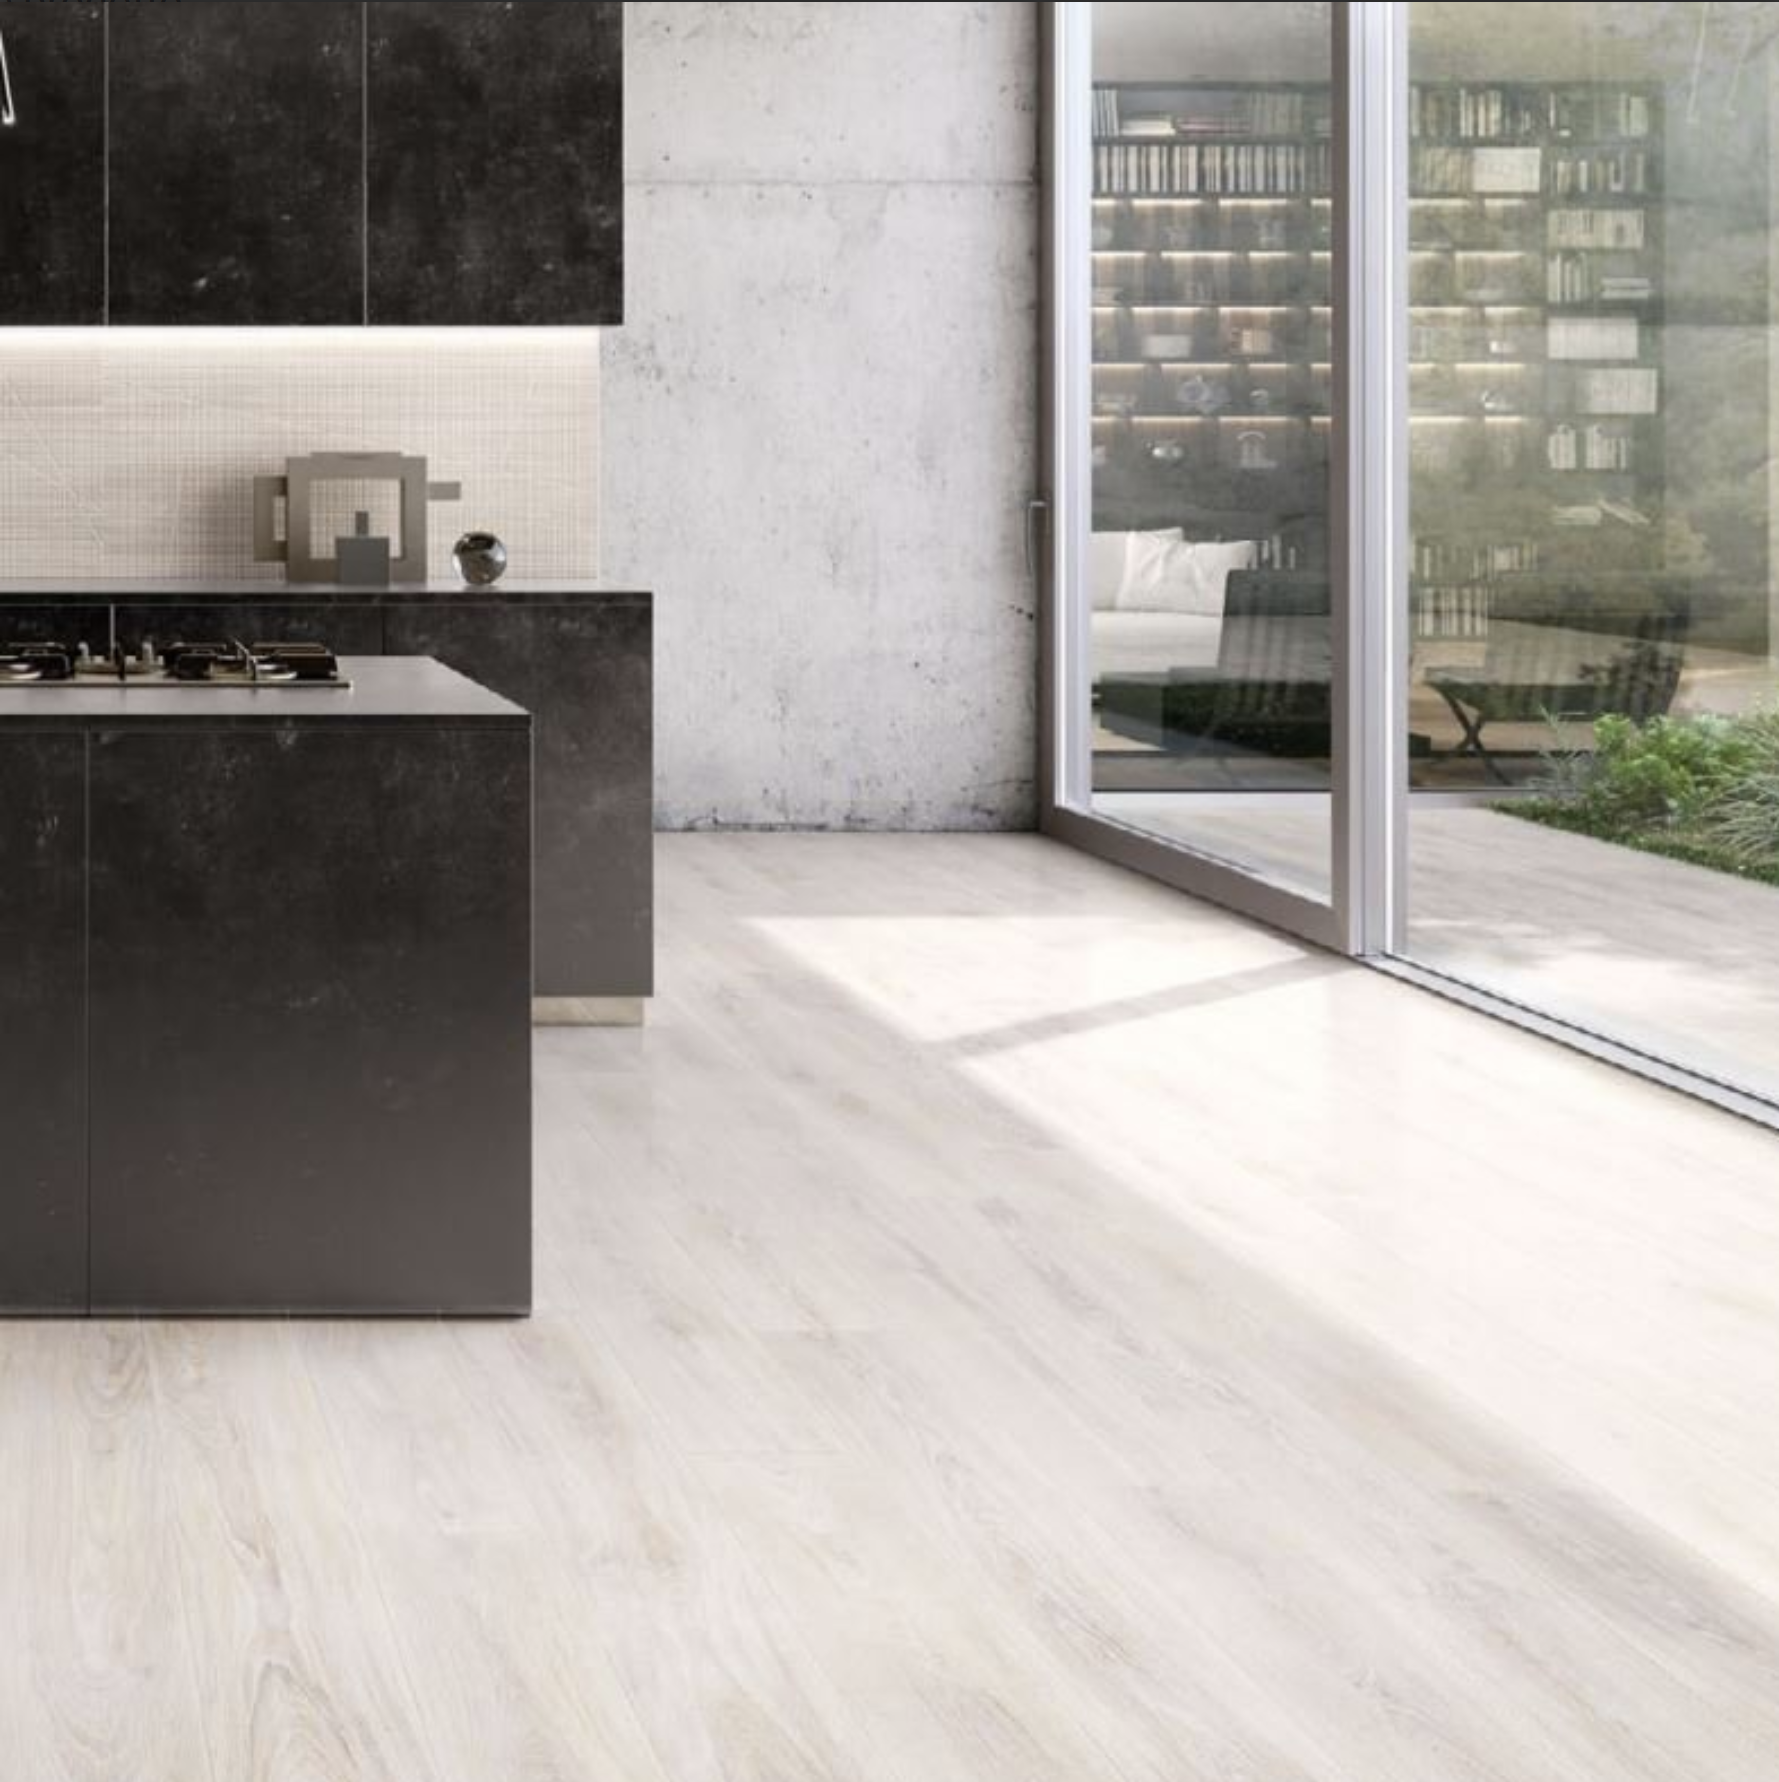 Woodtouch R10 Series Bleached Porcelain Tile Floor and Wall by Ergon Ceramica
